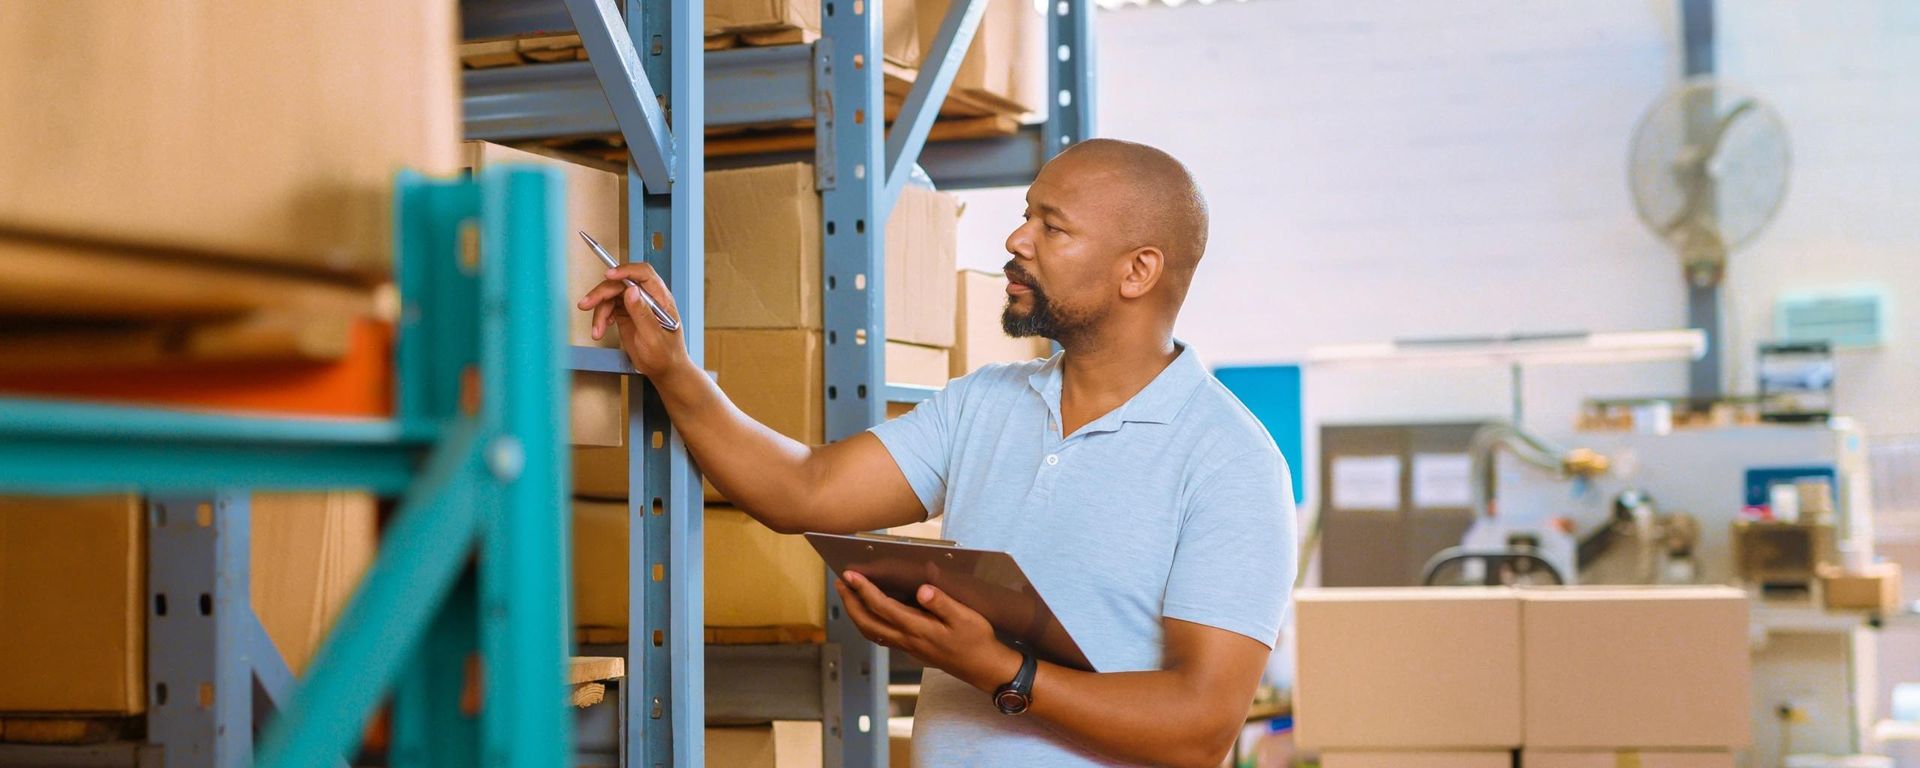 Custom inventory management software:
features, platforms, and technologies